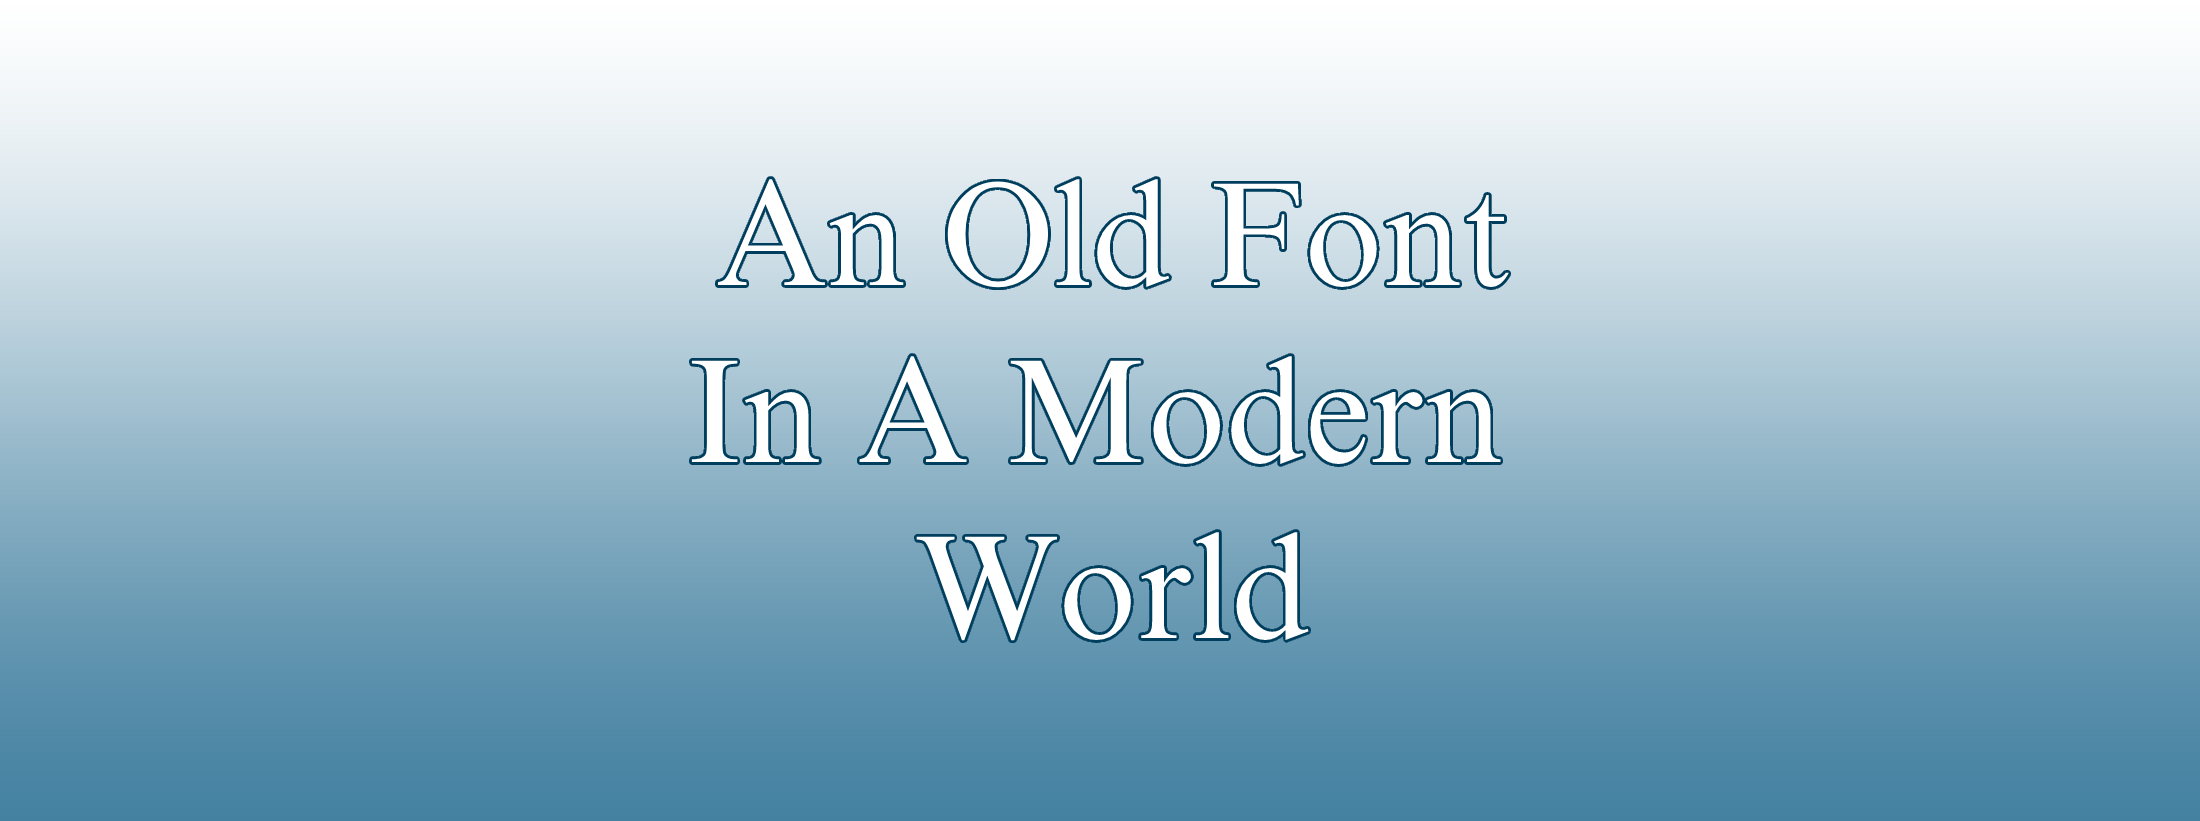 Times New Roman: An Old Font in a Modern World